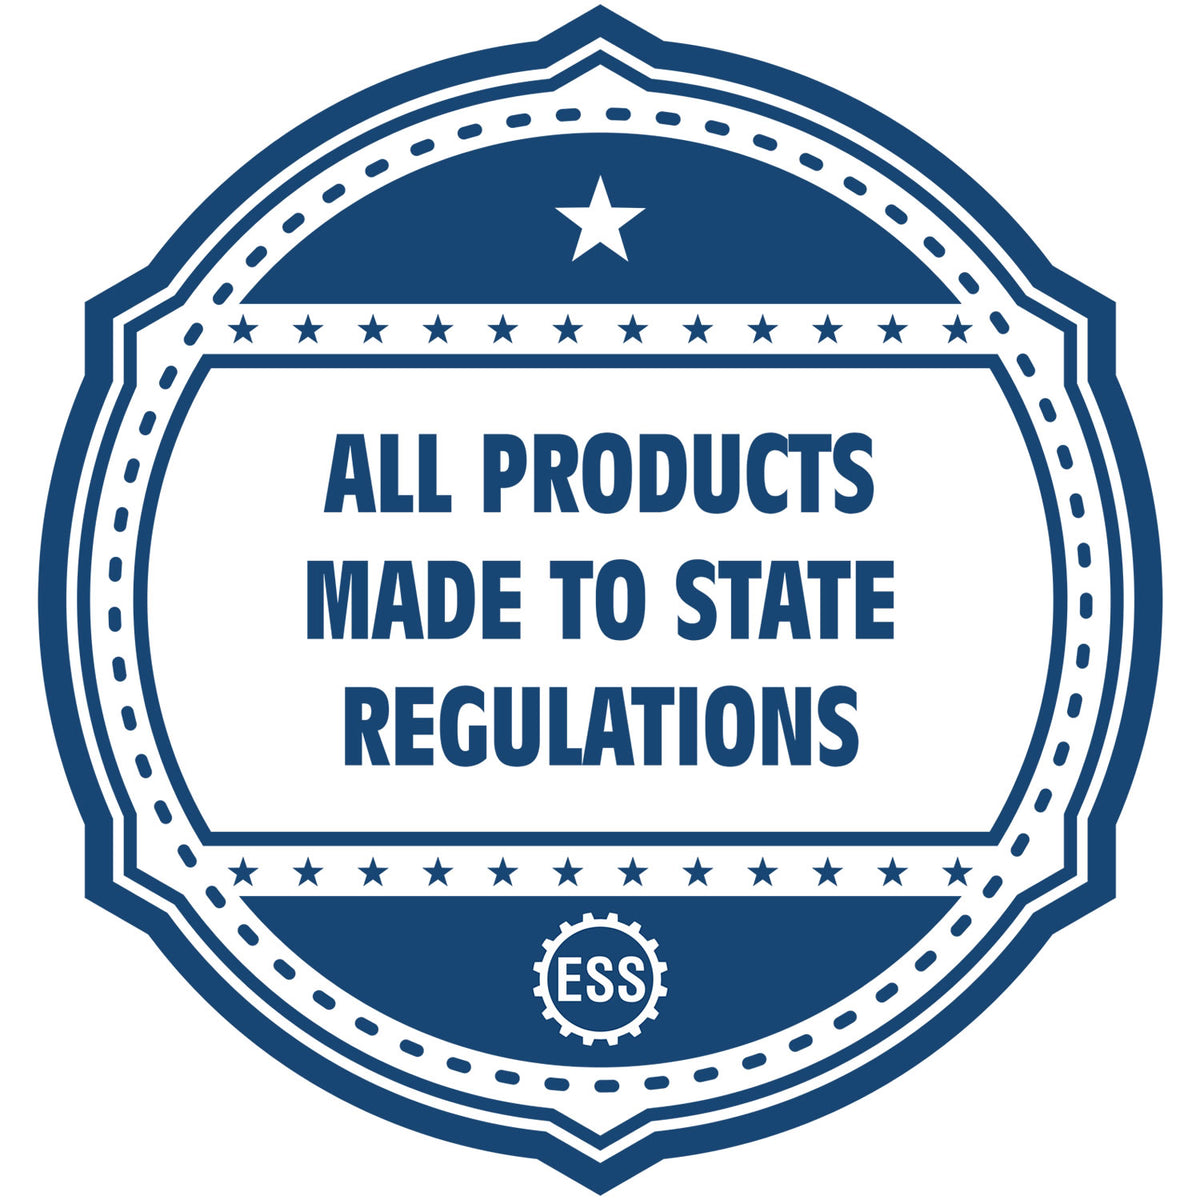 A blue icon or badge for the Gift Pennsylvania Engineer Seal showing that this product is made in compliance with state regulations.